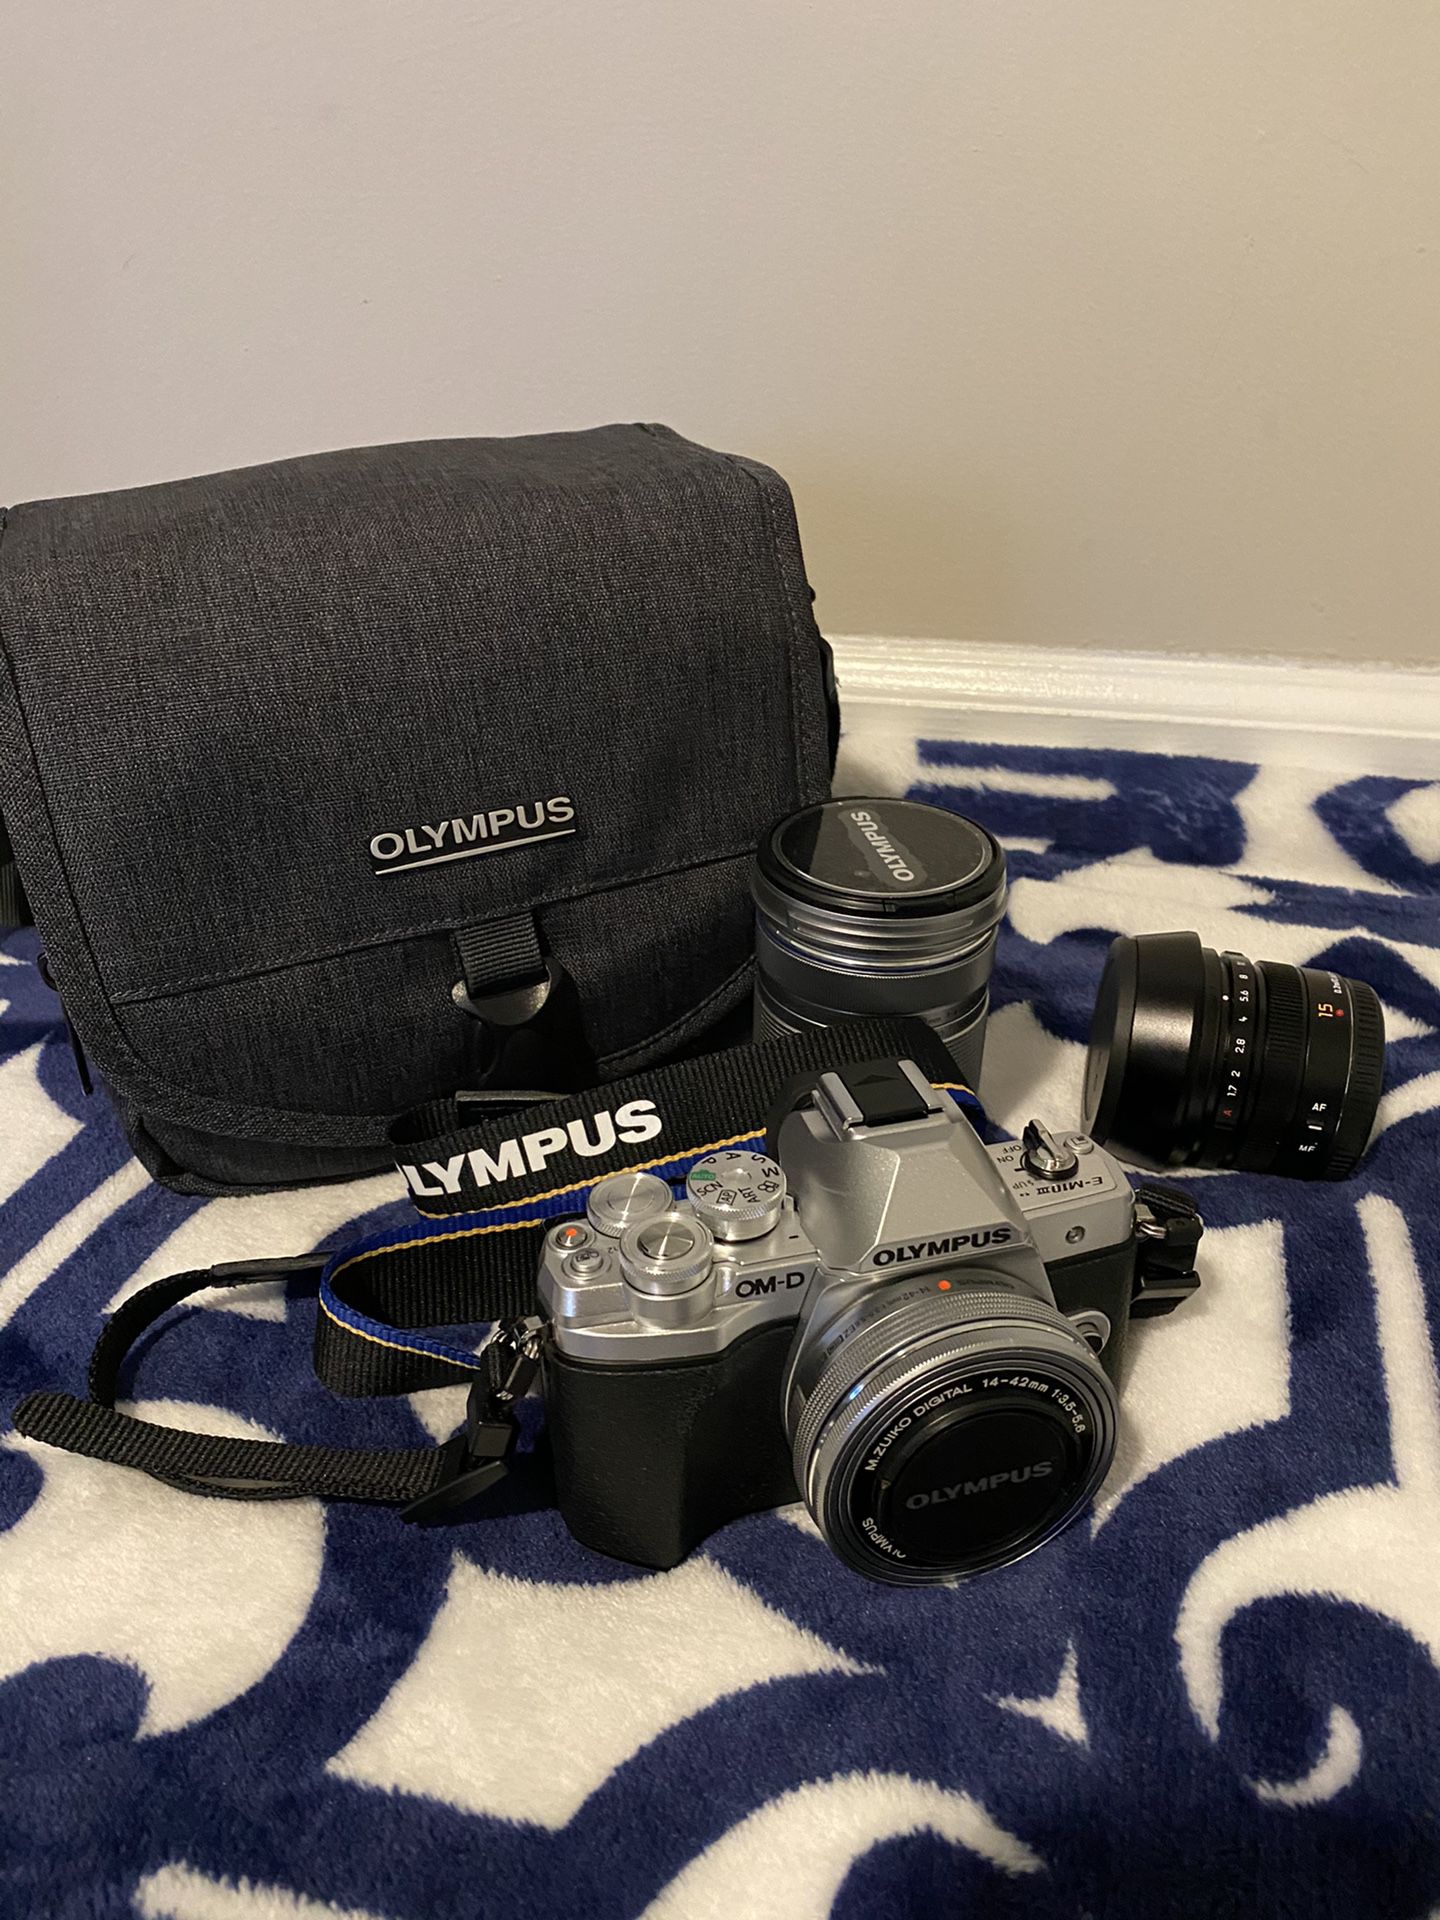 Excellent working condition (almost new) Olympus OM-D EM10 Mark 3 for sale !!!